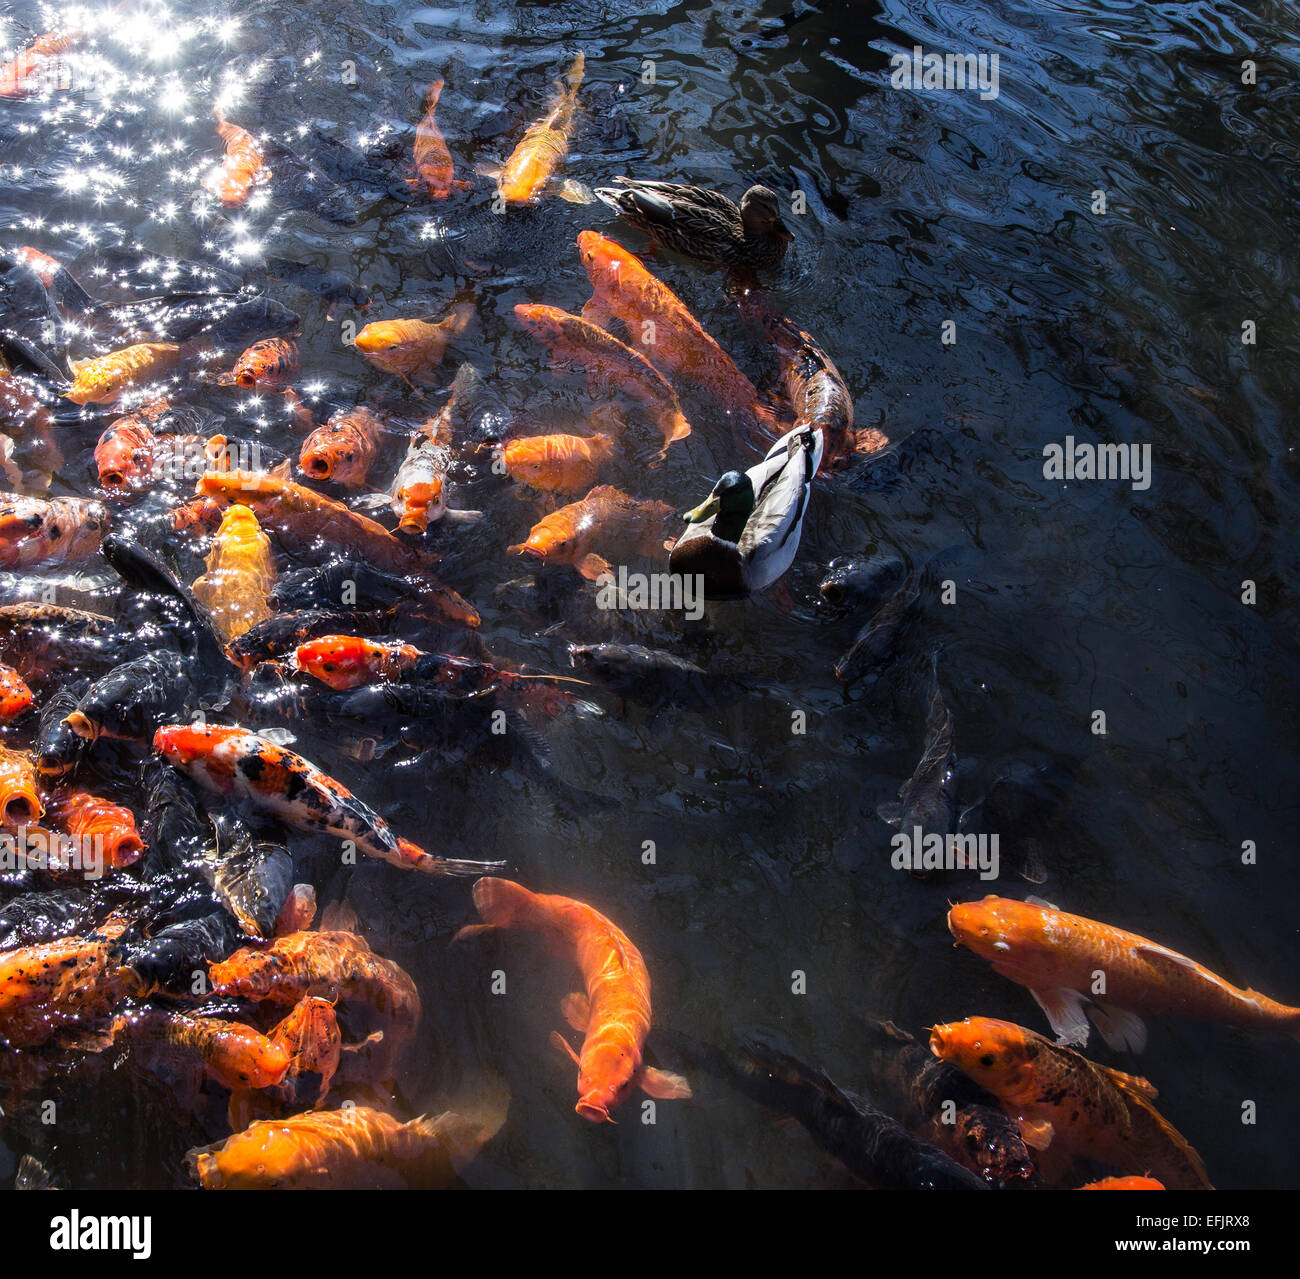 Fish and Ducks searching for food Stock Photo - Alamy